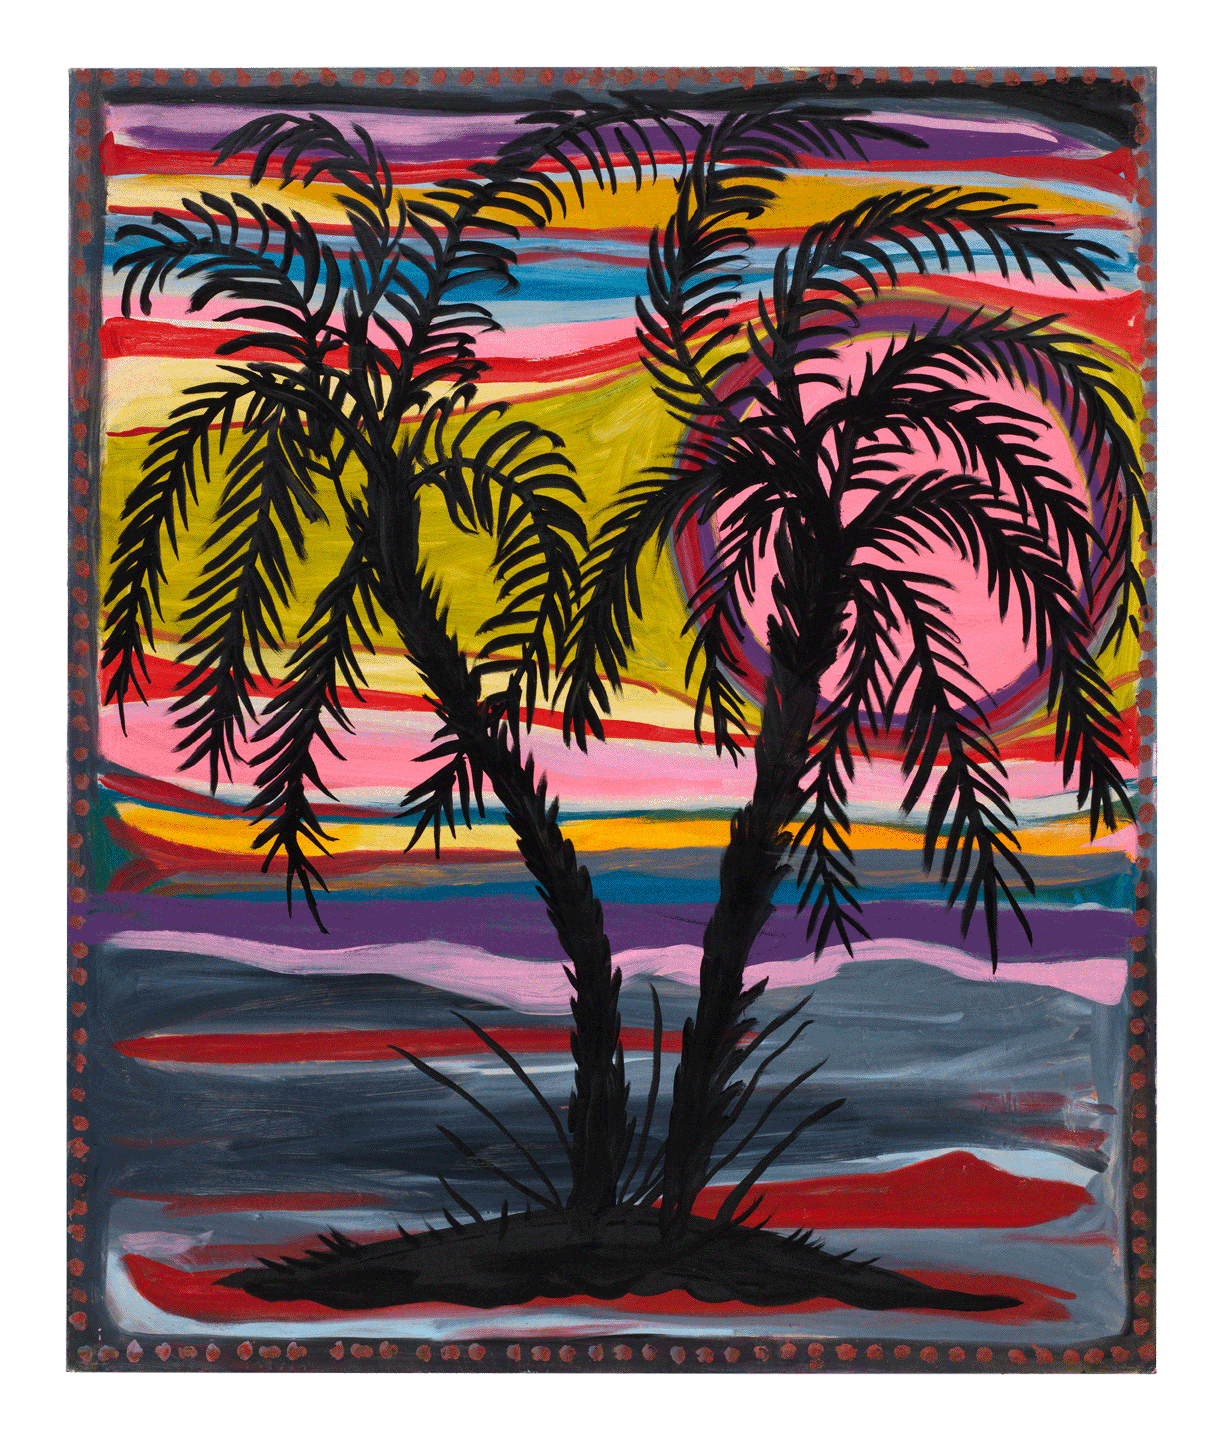 An oil painting on linen by Josh Smith, titled Palms #1, dated 2019.